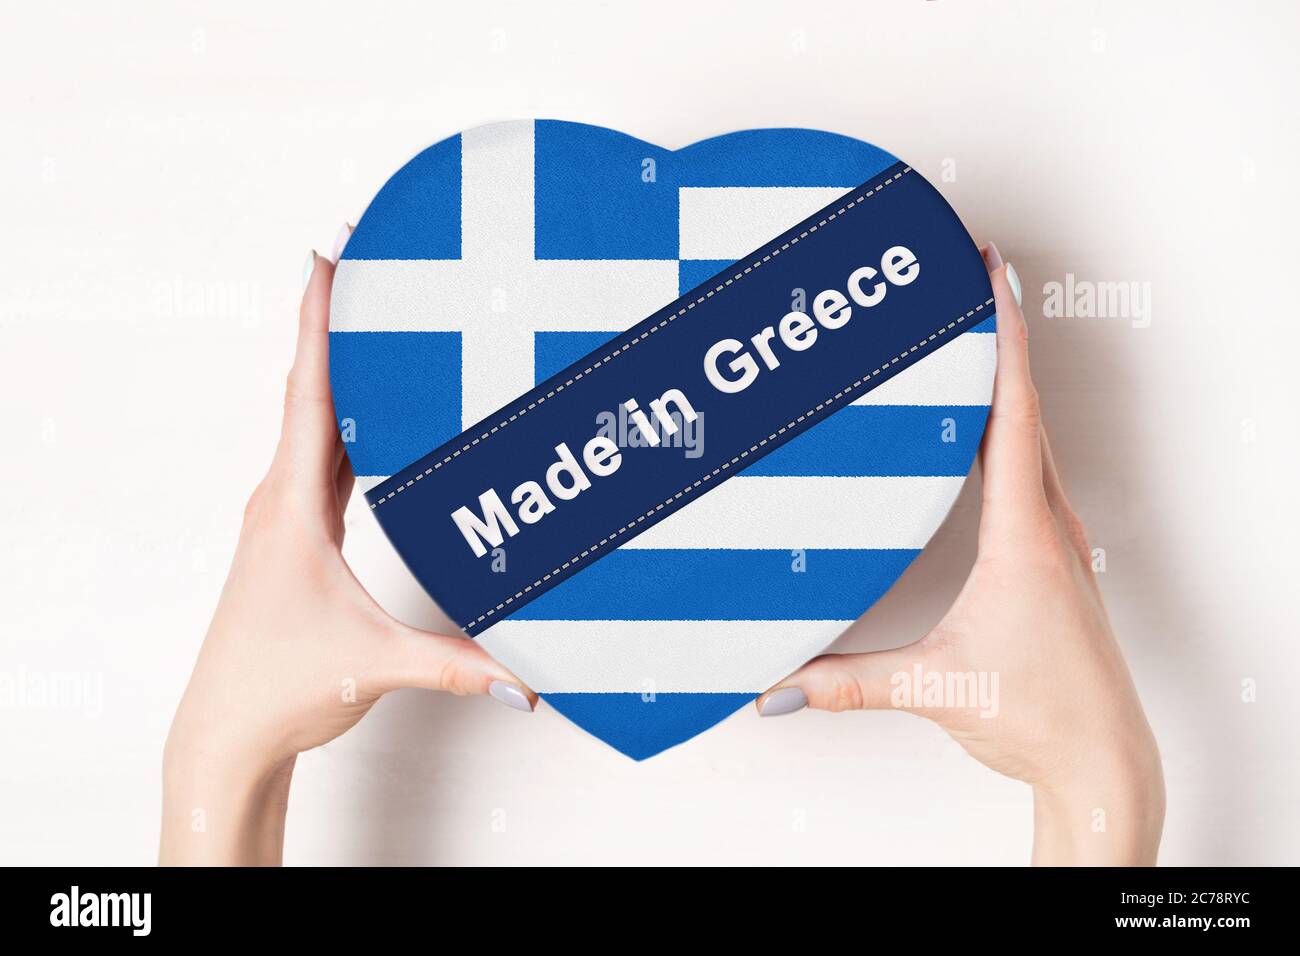 Inscription Made in Greece, the flag of Greece. Female hands holding a heart shaped box. White background. Stock Photo